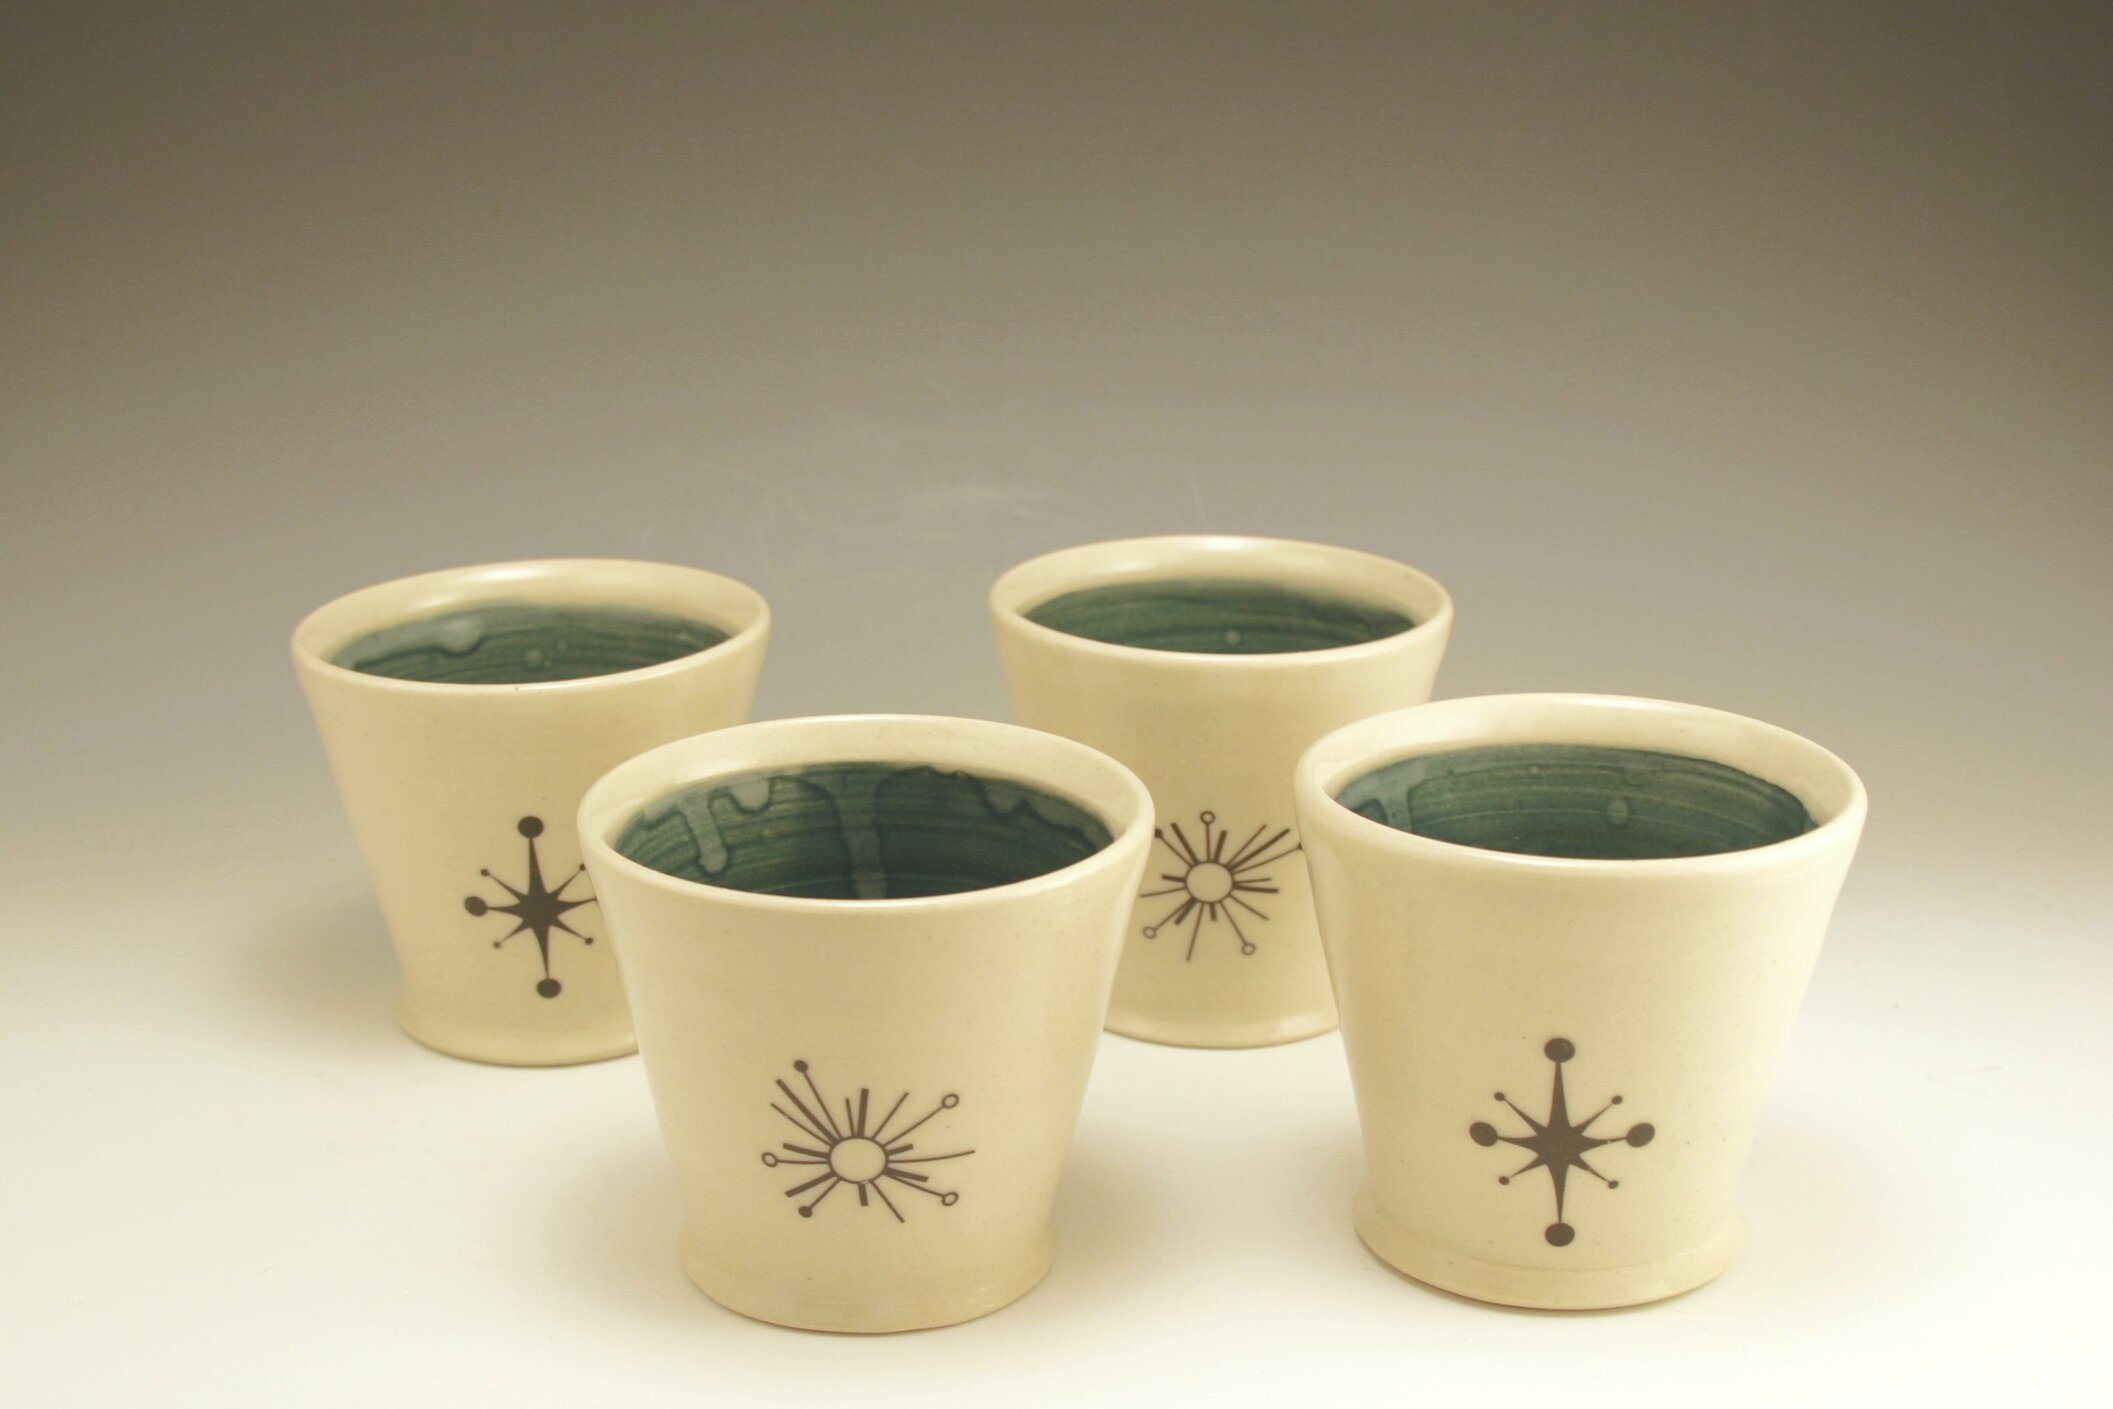 Four-star whisky cups